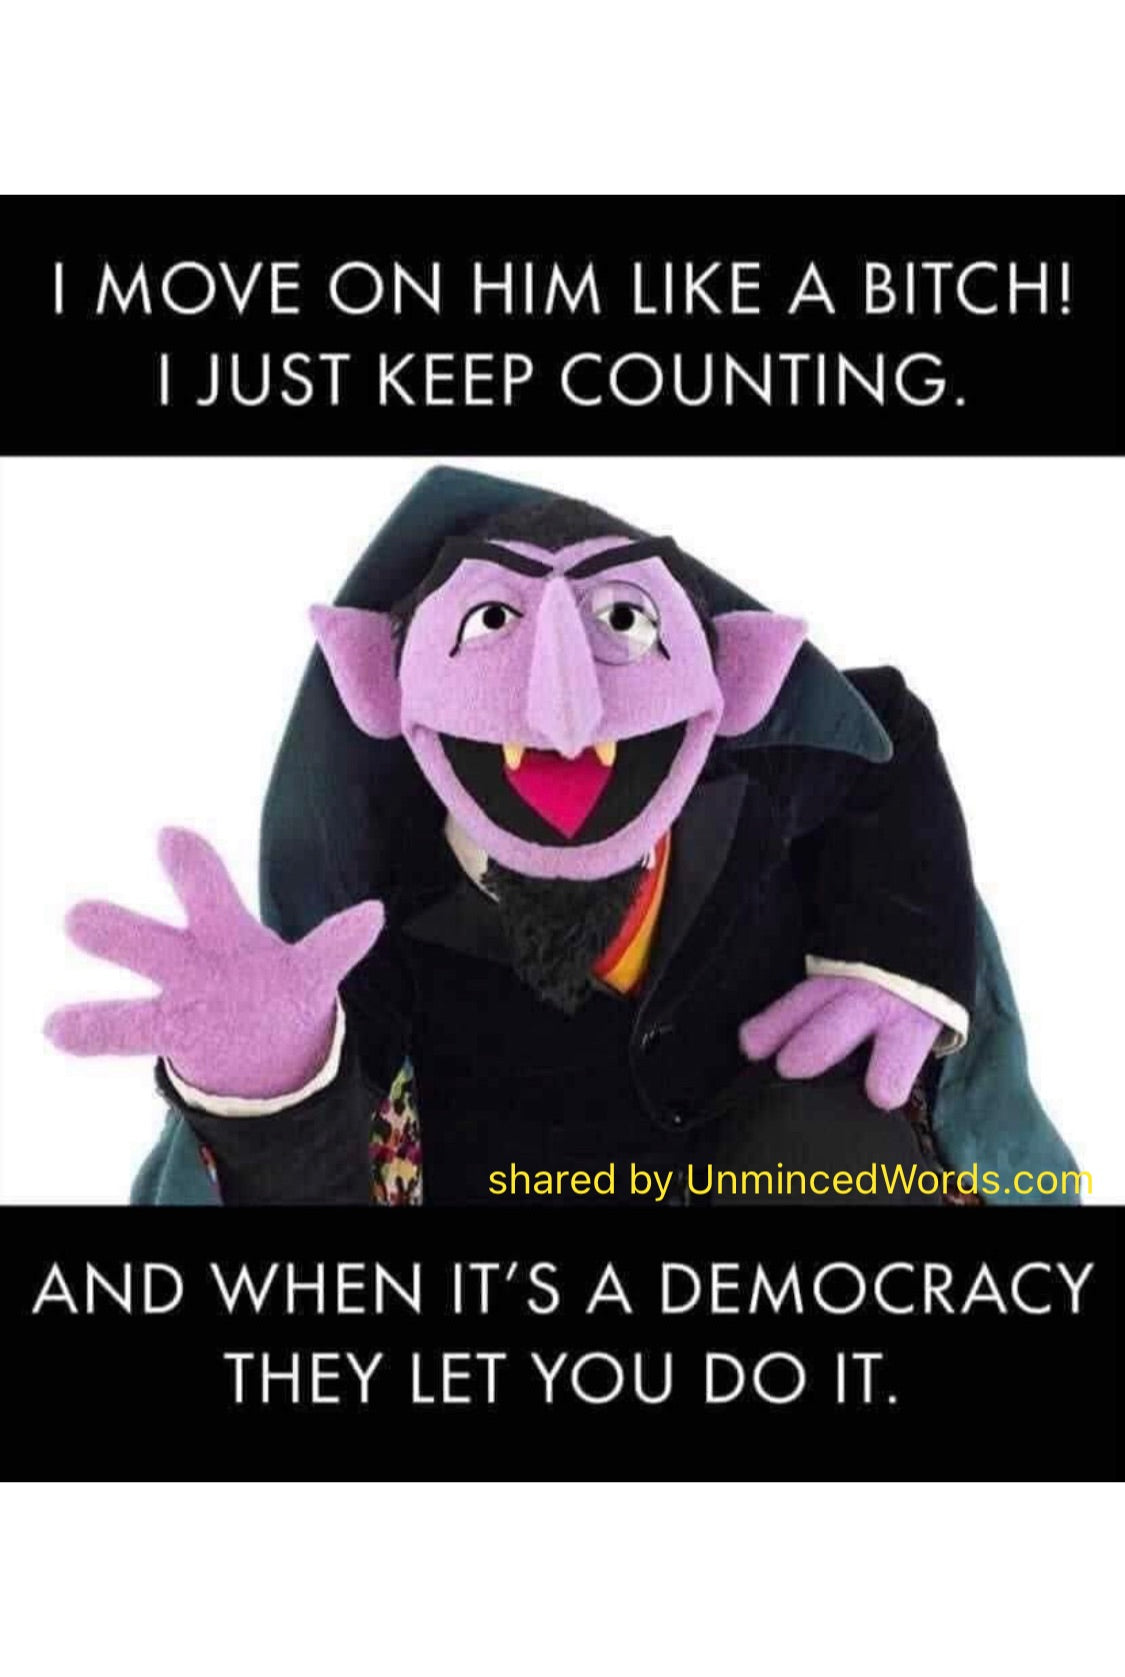 The Count has something to add.